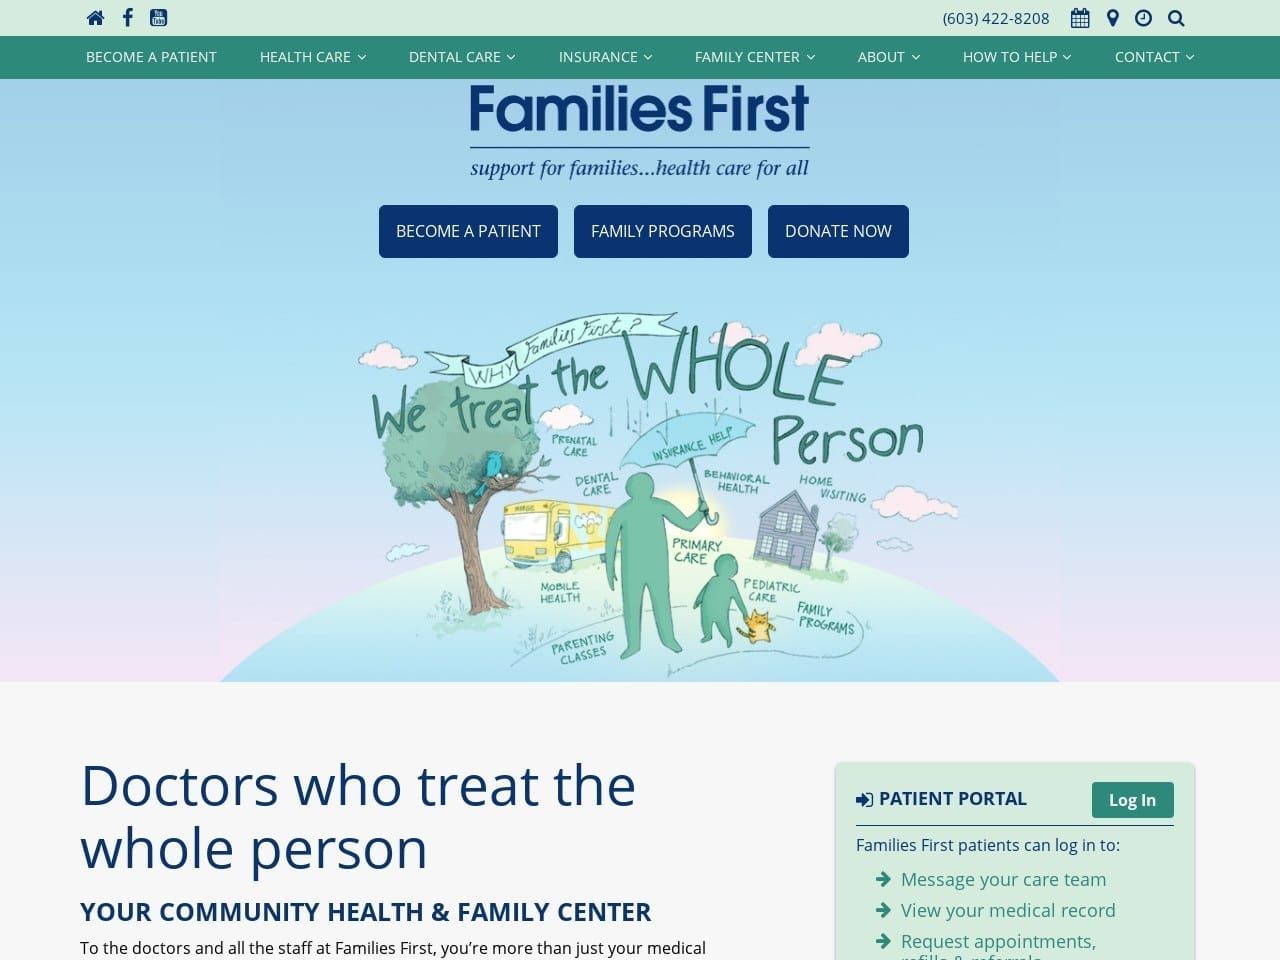 Families First Health and Support Center Website Screenshot from familiesfirstseacoast.org